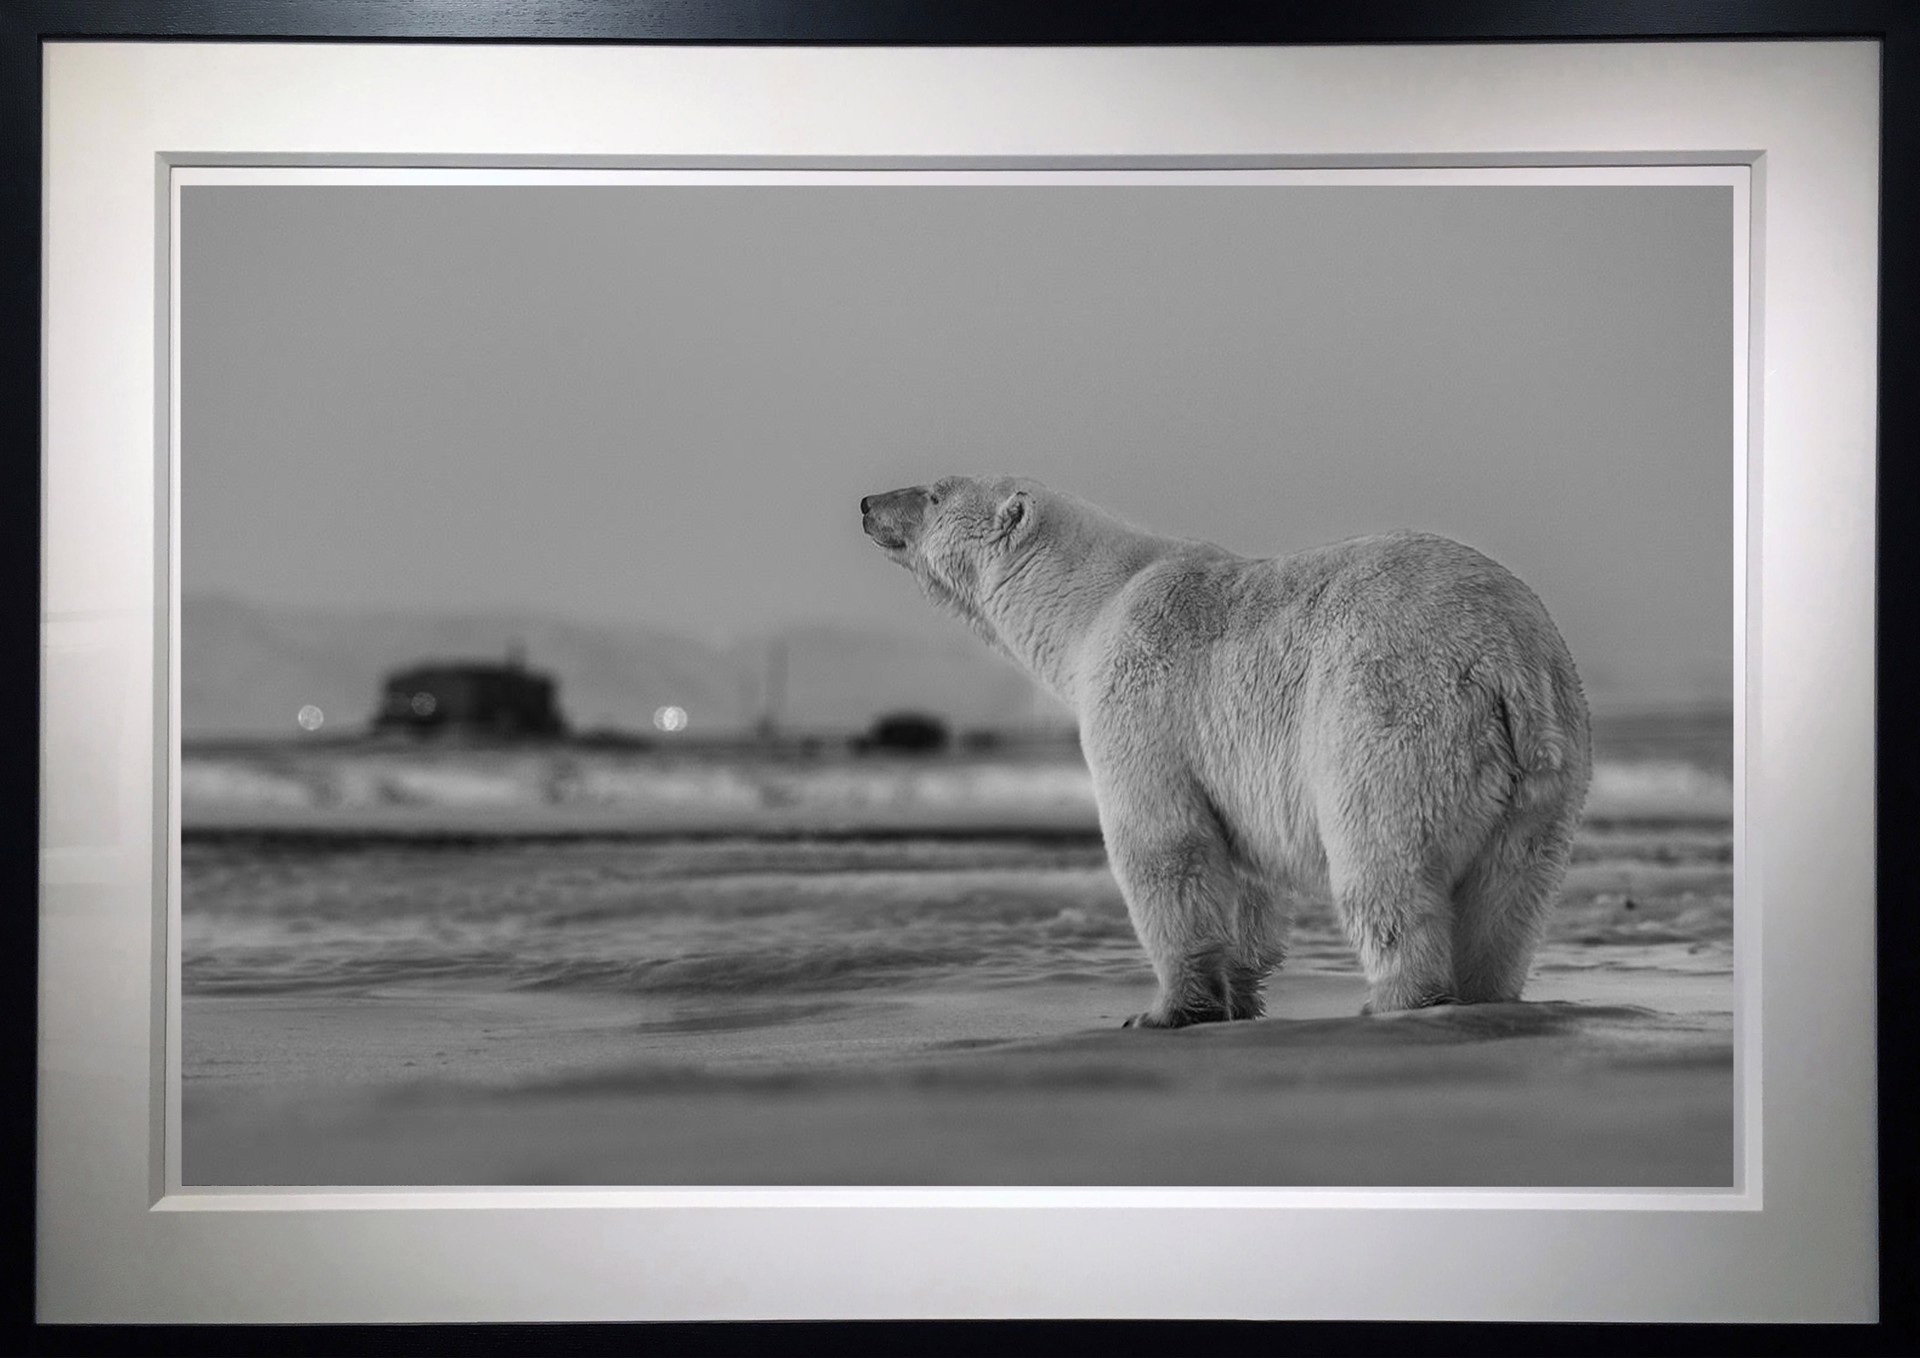 My Place or Yours by David Yarrow